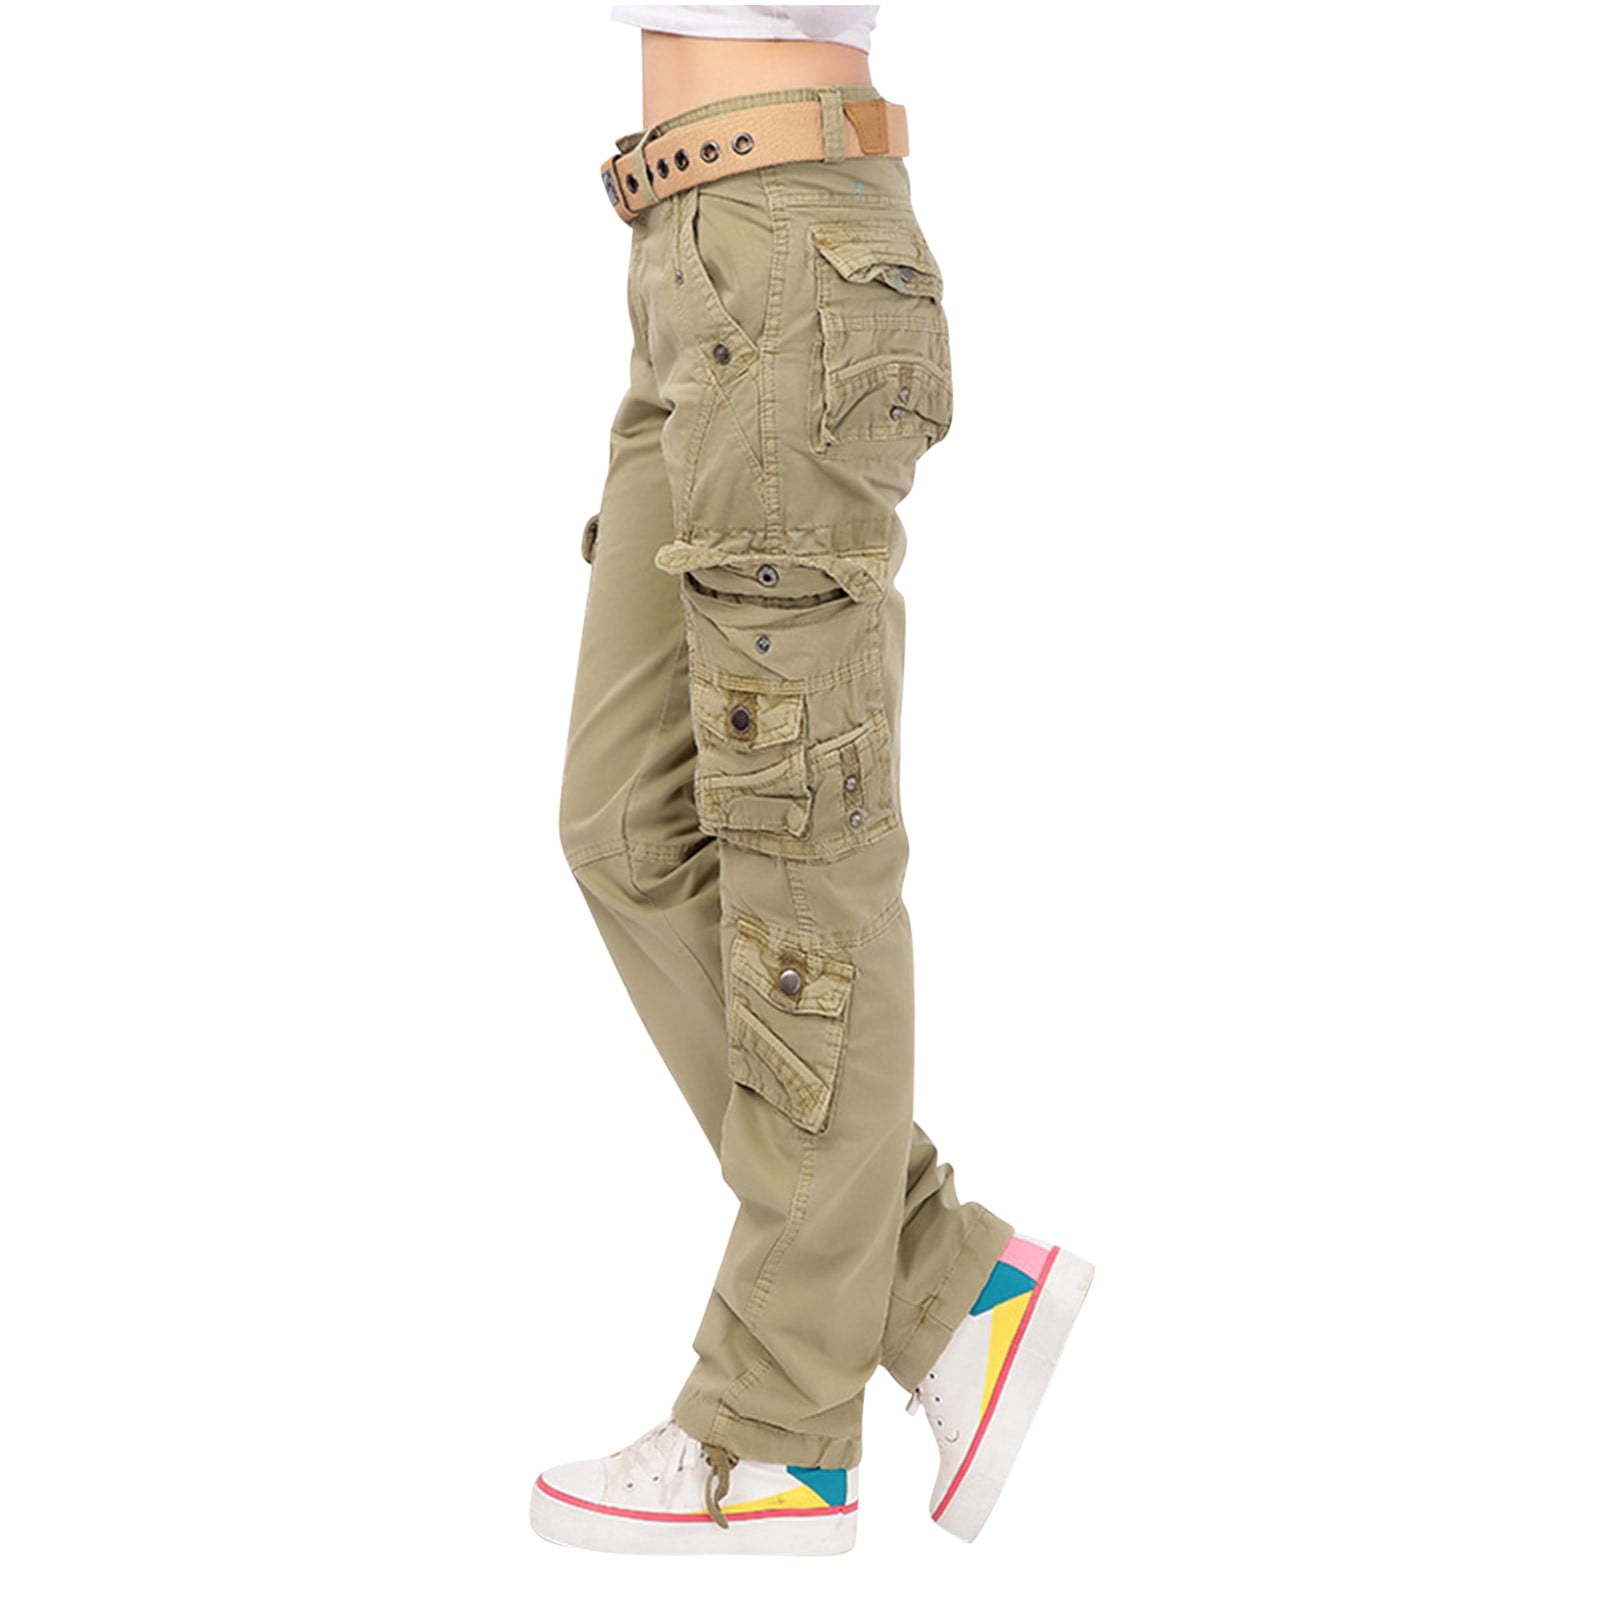 YYDGH Womens Cargo Pants with Pockets Outdoor Casual Ripstop Camo Tactical  Construction Work Pants Khaki Khaki